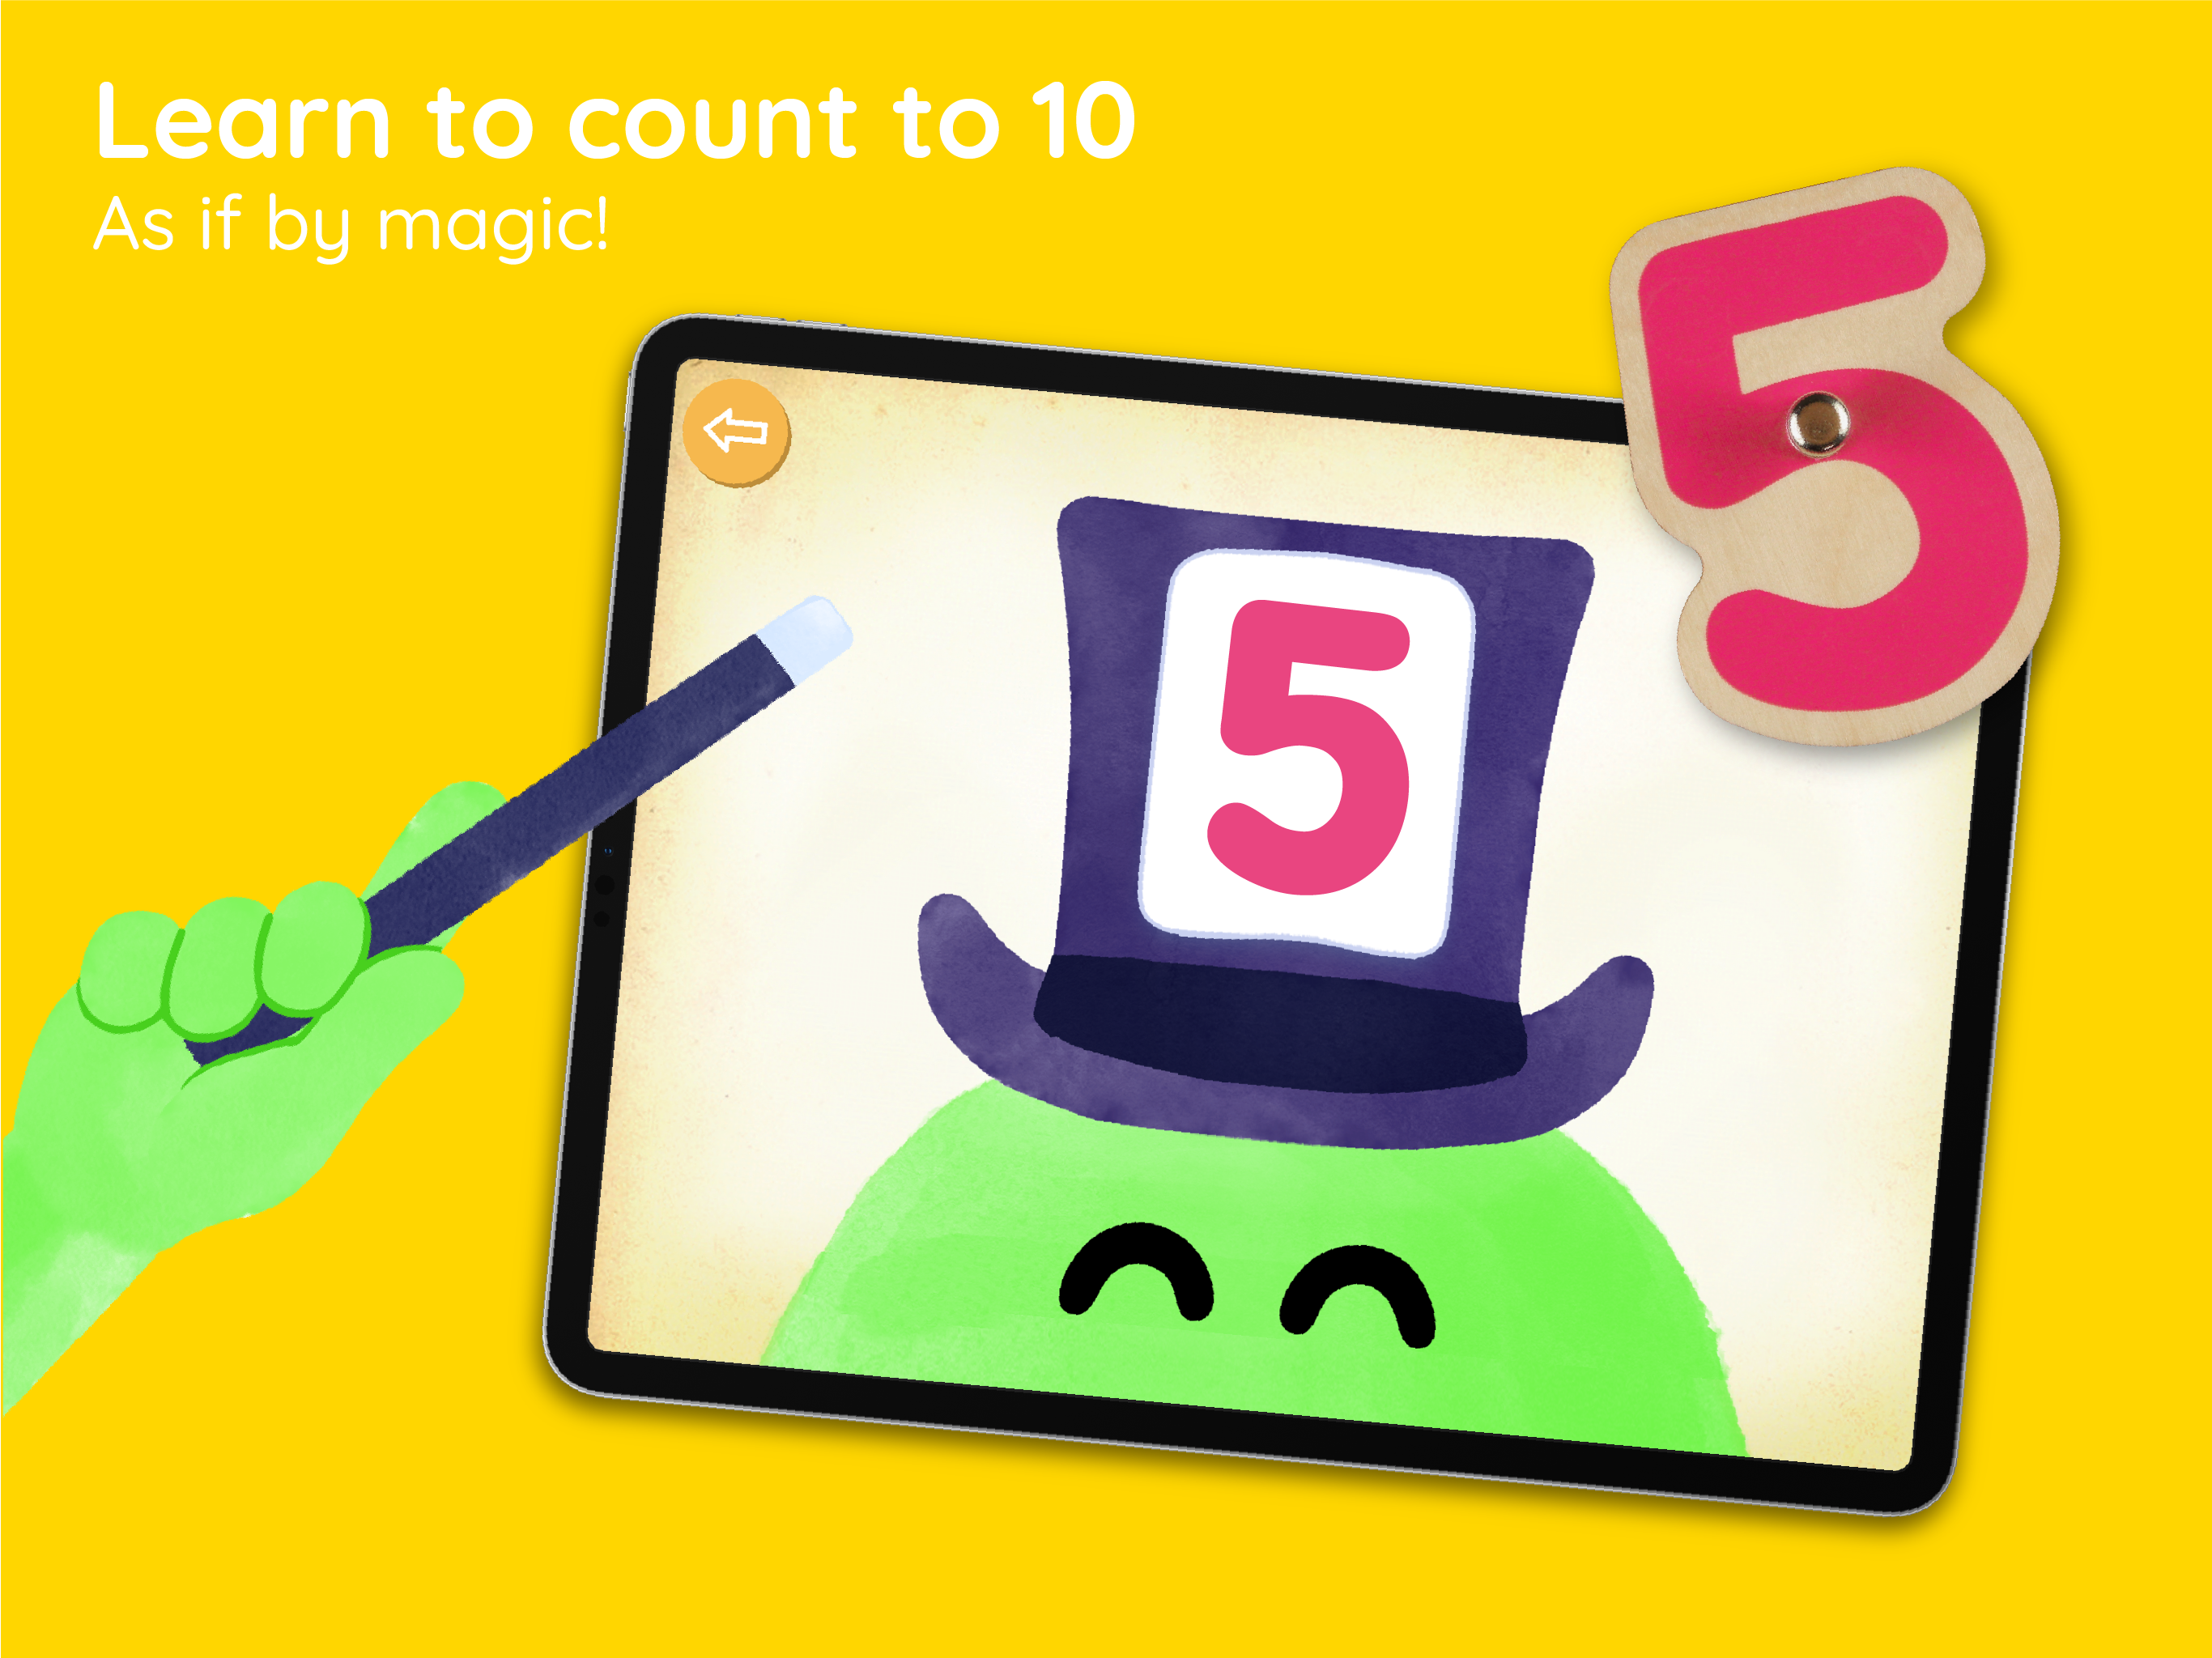 Learn to count up to 10